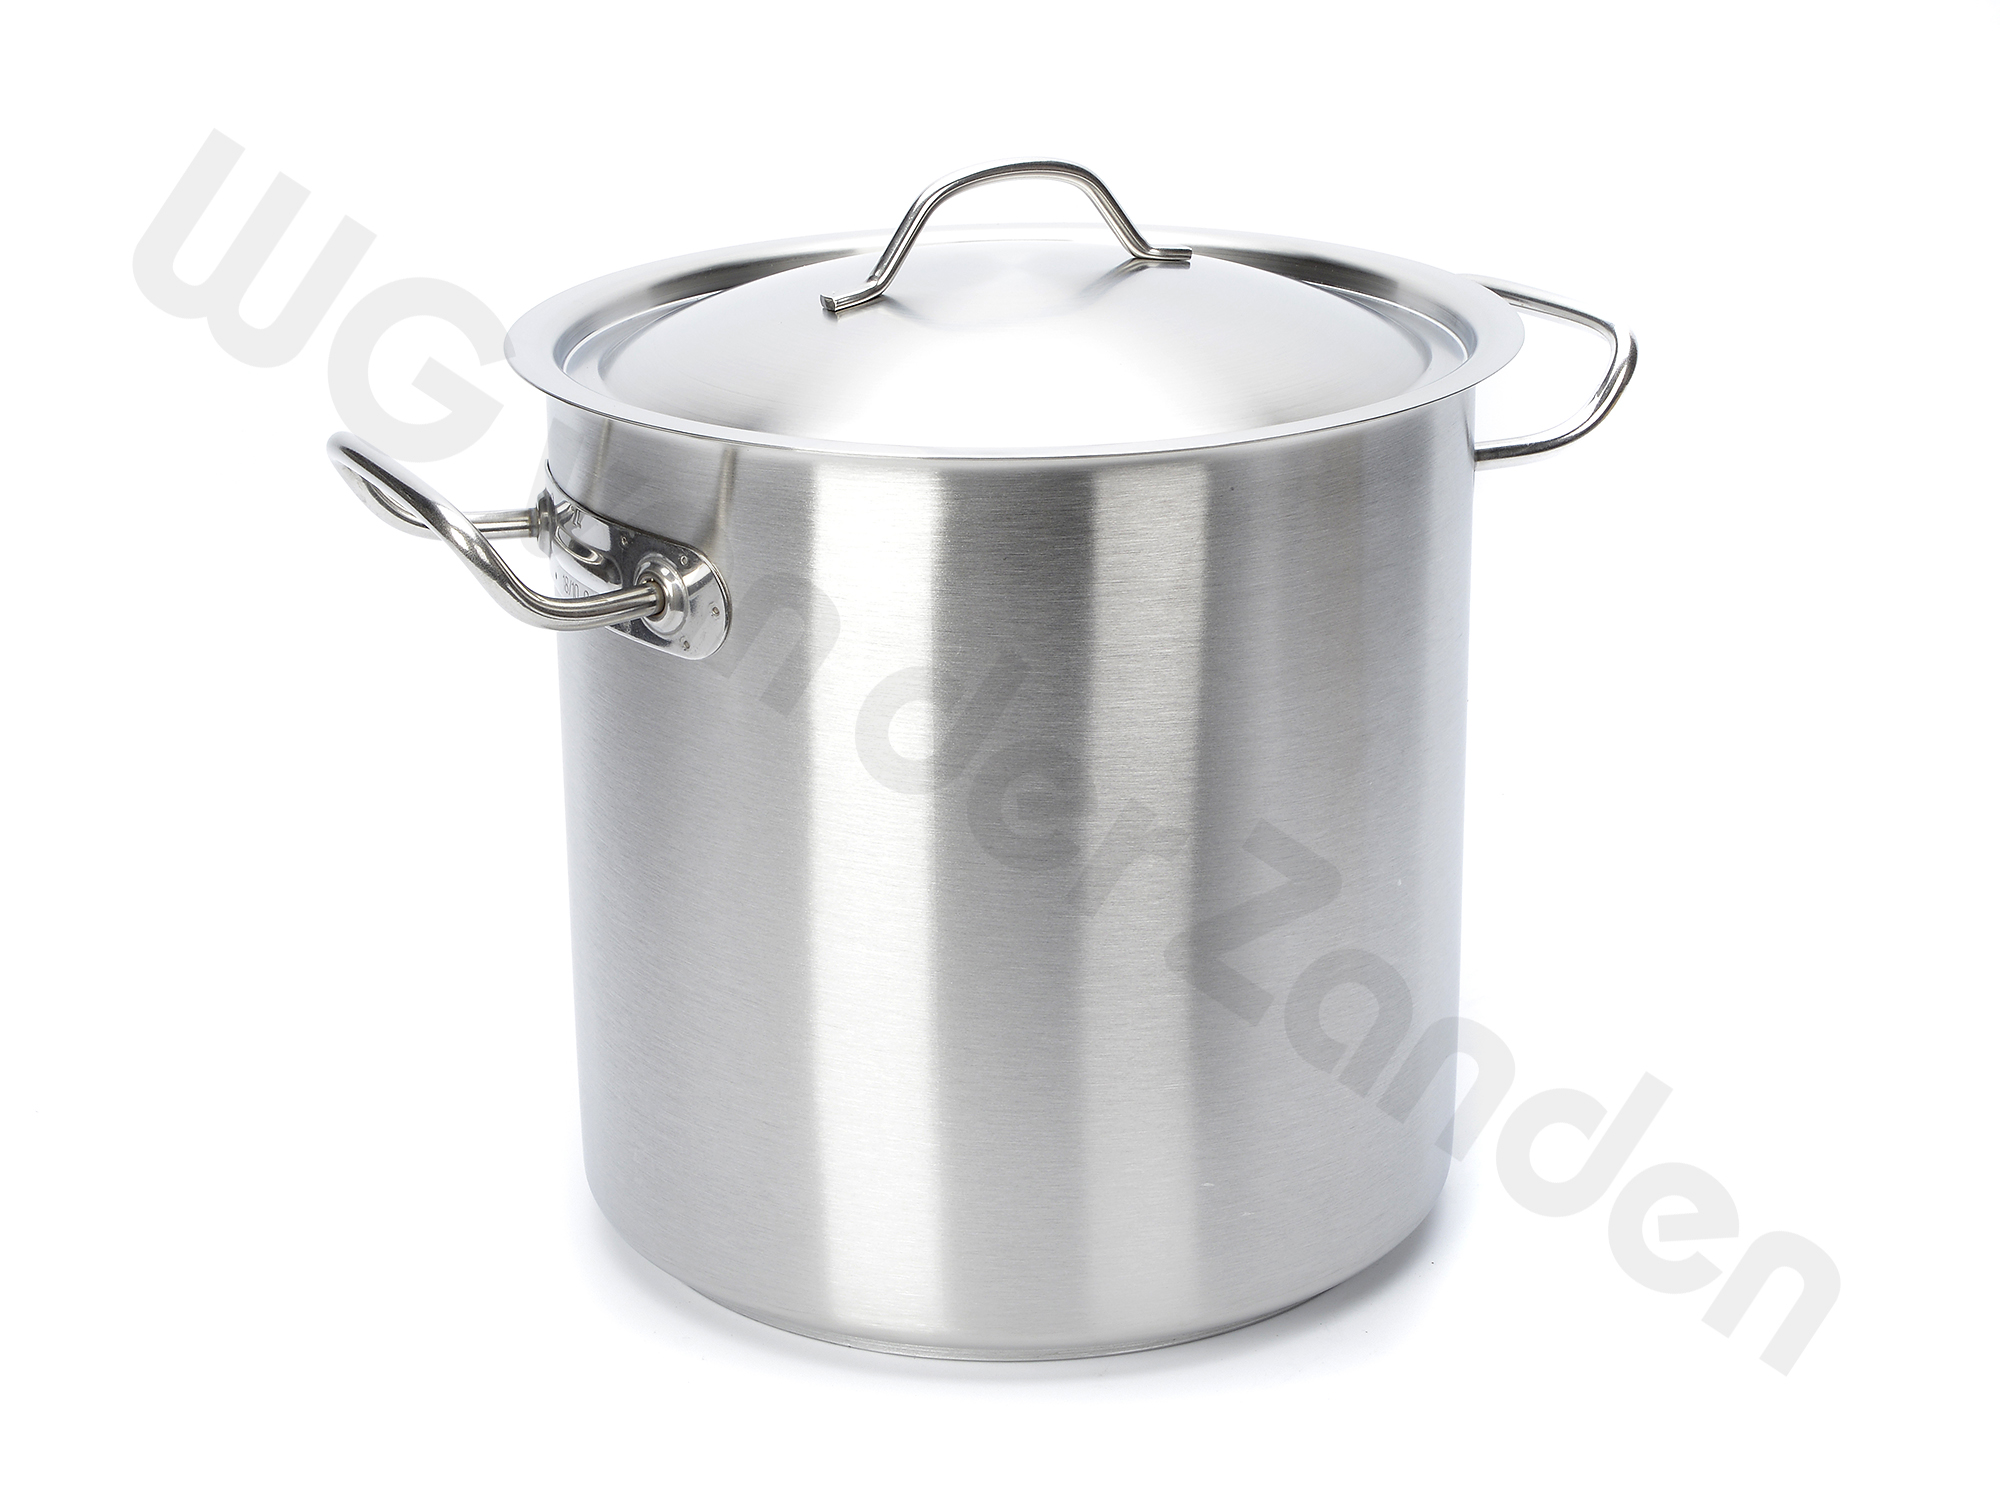 521818 STOCKPOT S/S 18Ø X 18CM 4.4 LTR WITH COVER